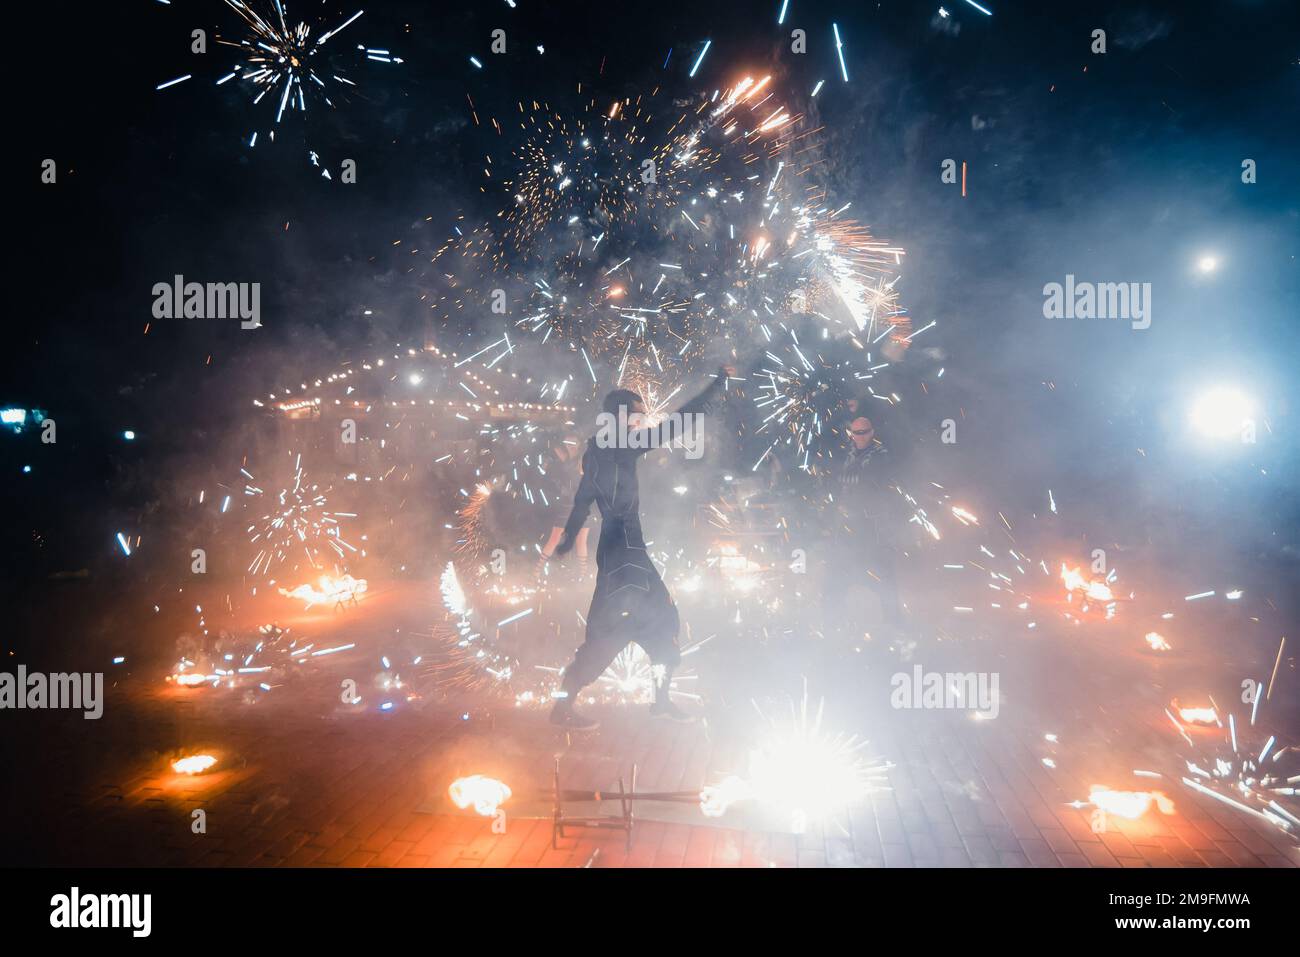 SEMIGORYE, IVANOVO OBLAST, RUSSIA - JULY 16, 2016: Dangerous fire show from the team of professional performers with burning torches and sparks Stock Photo